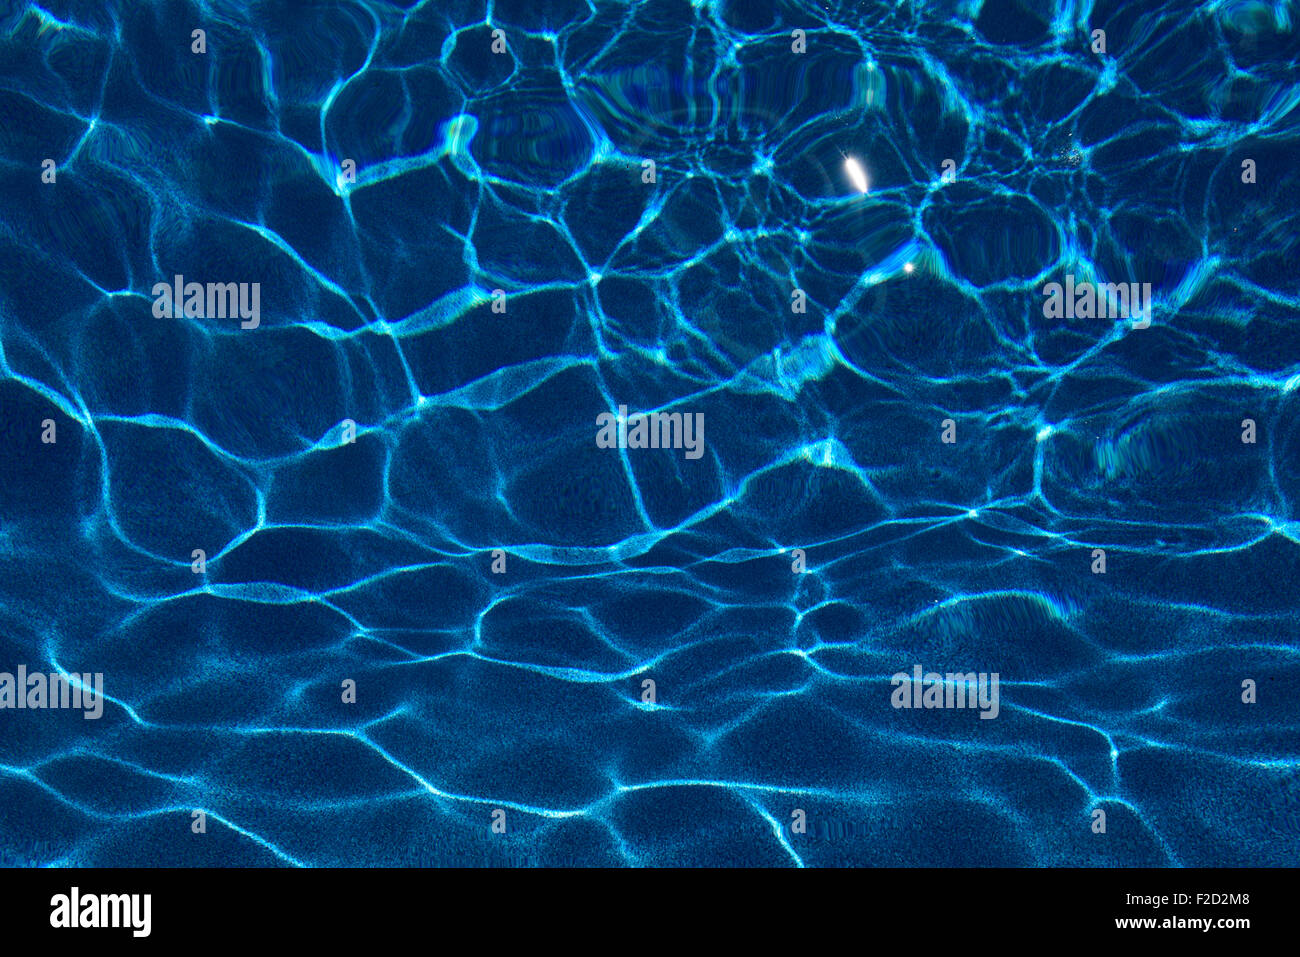 Sun creating abstract dappled light mesh from waves on a blue pool Stock Photo